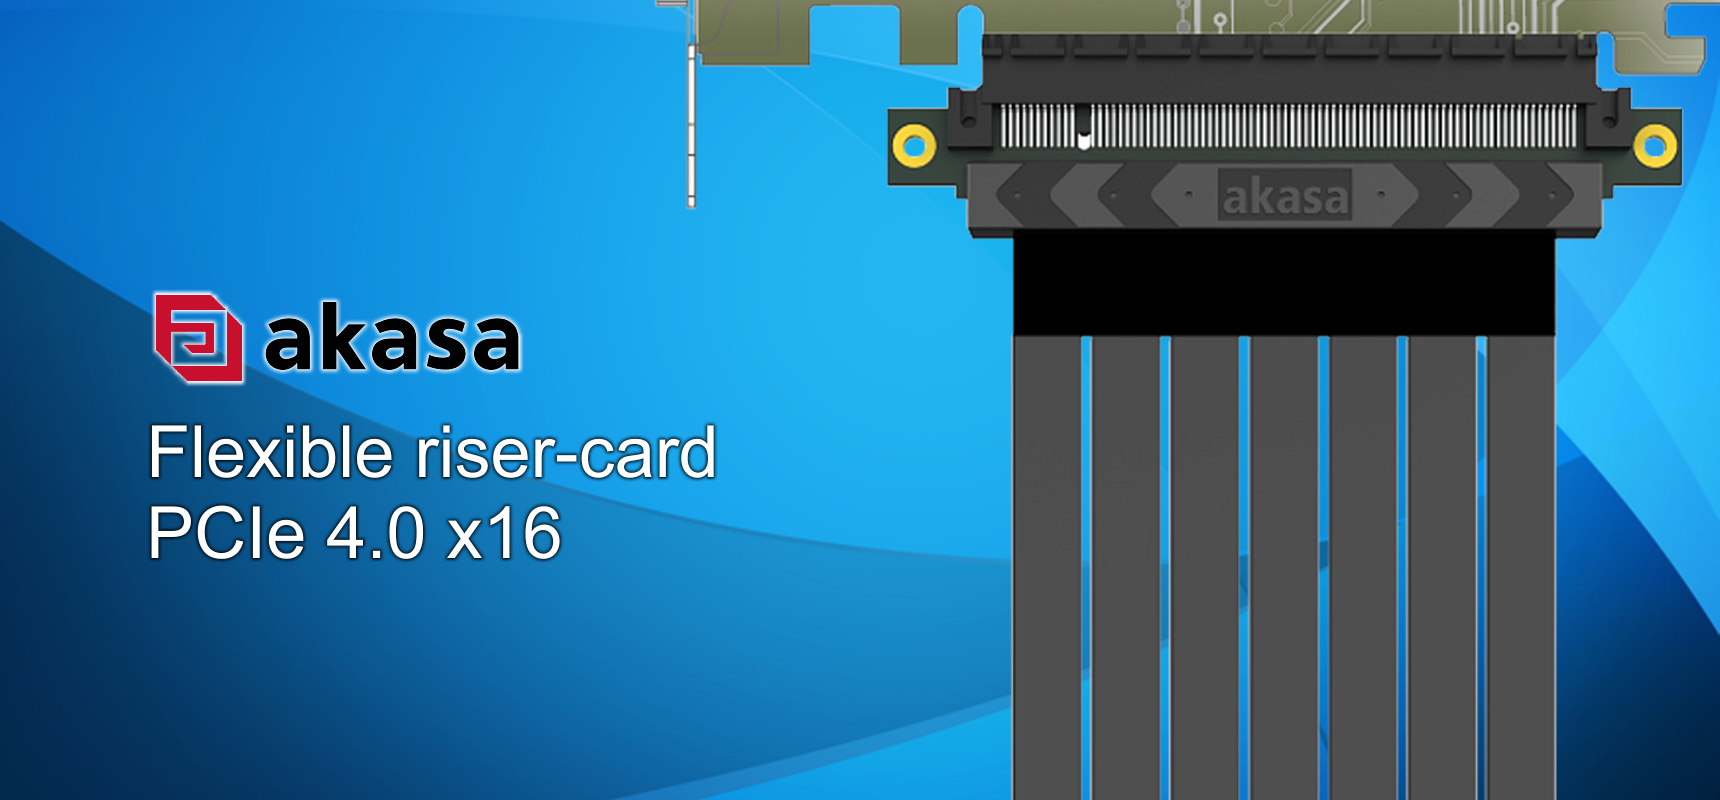 Flexible riser-card with PCIe 4.0 x16 support by akasa